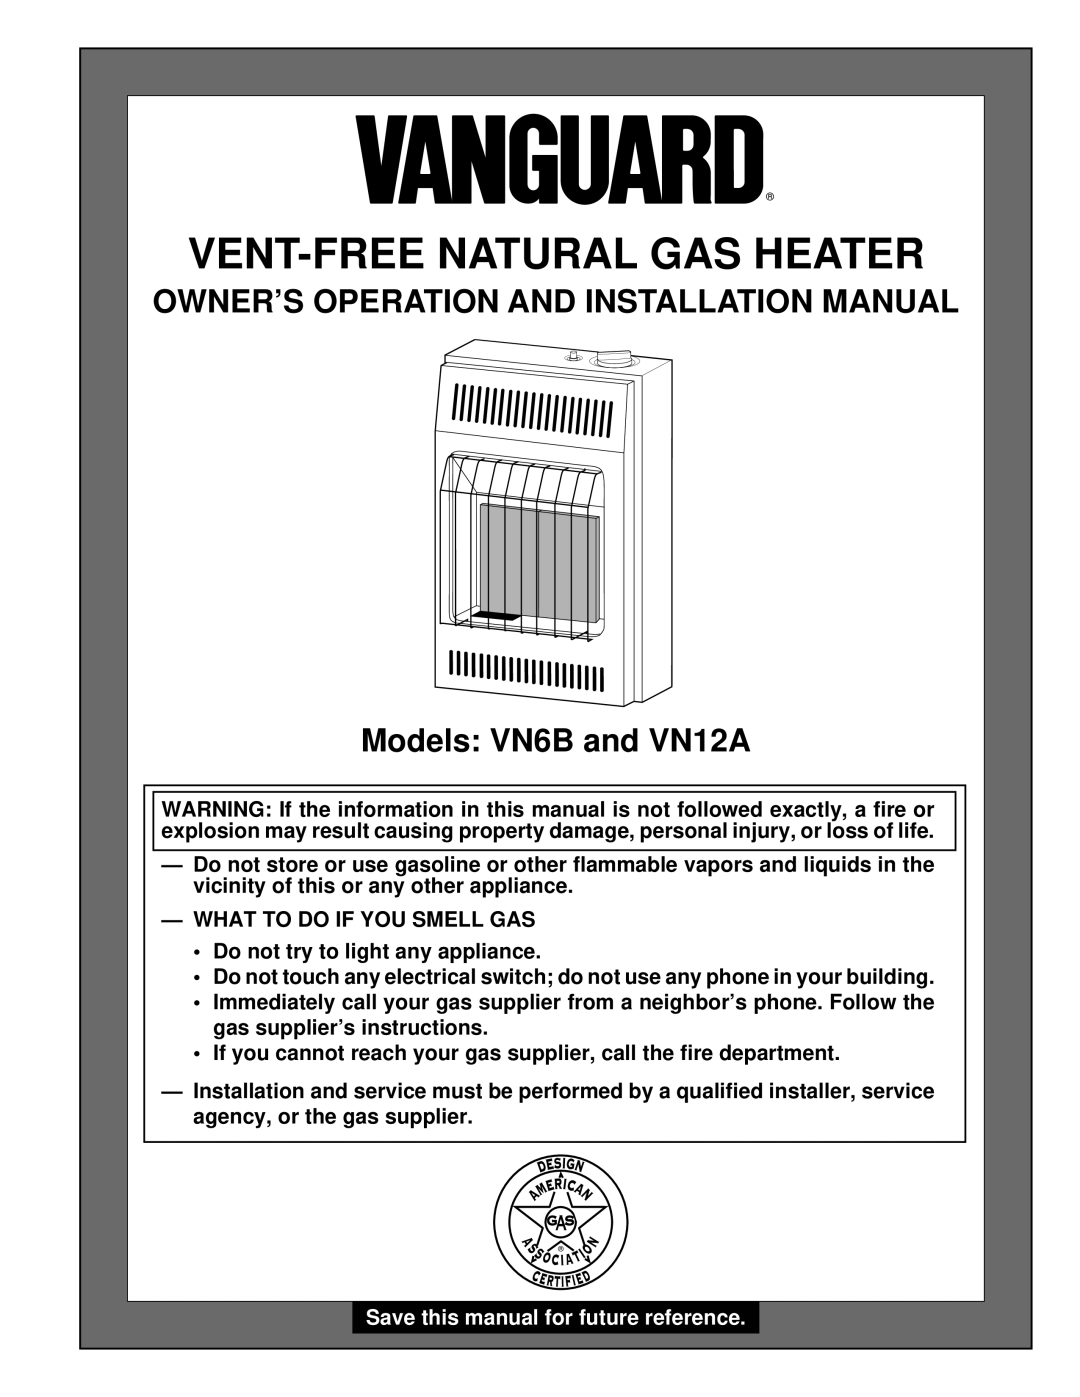 Vanguard Heating installation manual Owner’S Operation And Installation Manual, Models VN6B and VN12A 